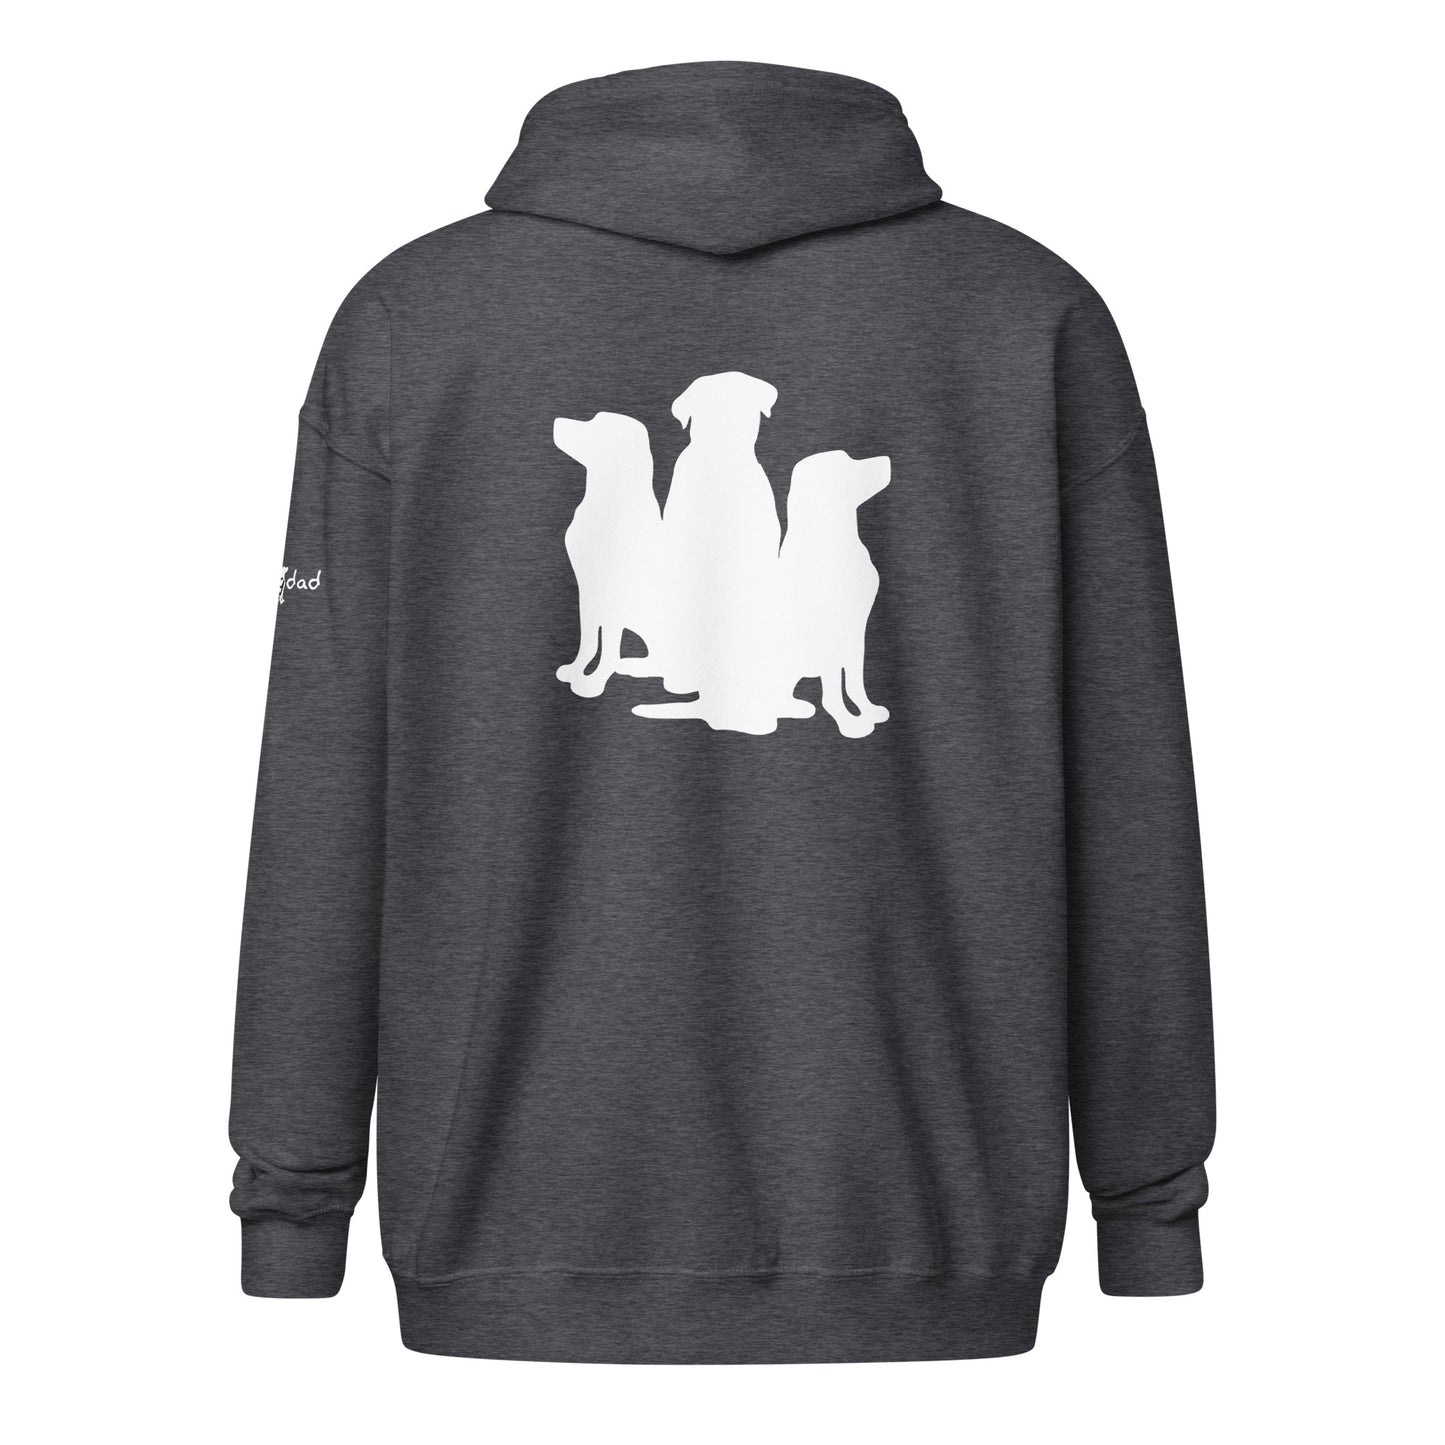 Unisex heavy blend zip hoodie 3 Dogs with Full Logo